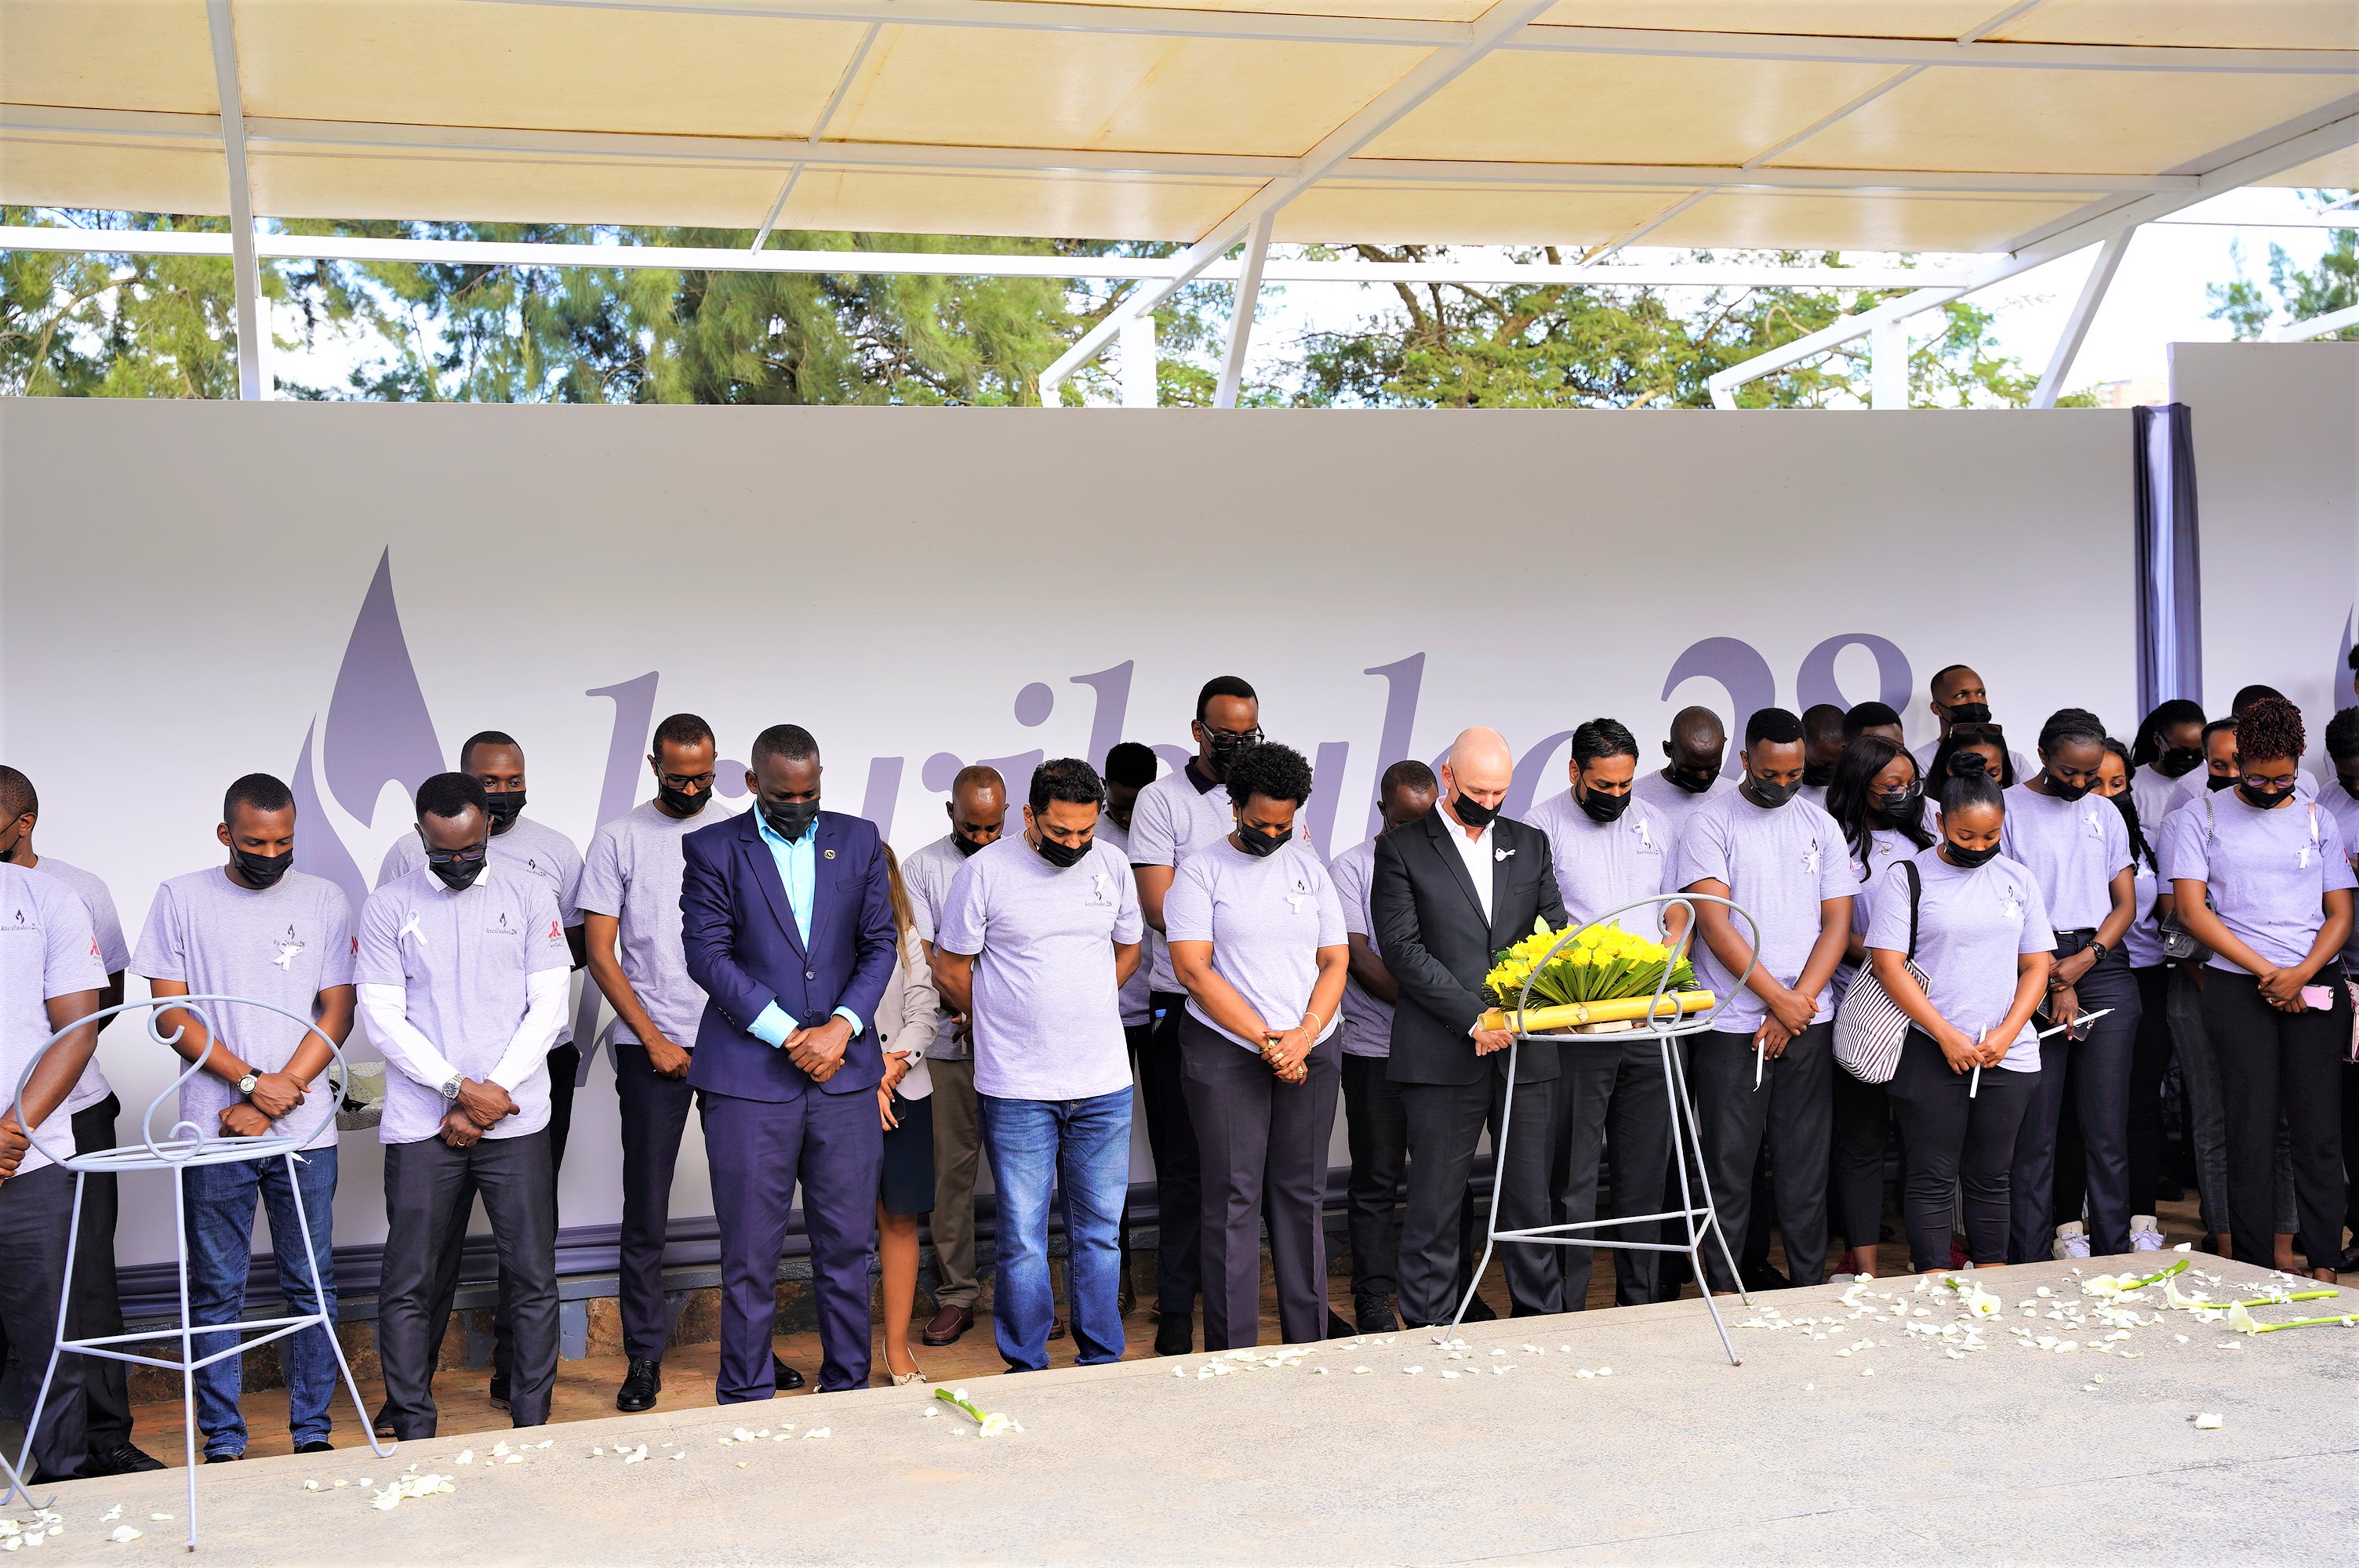 Kigali Marriot Hotel  management and staff  observe a moment of silence to pay tribute to the victims of the Genocide against the Tutsi at Kigali Genocide Memorial on Apri 19. / Craish Bahizi